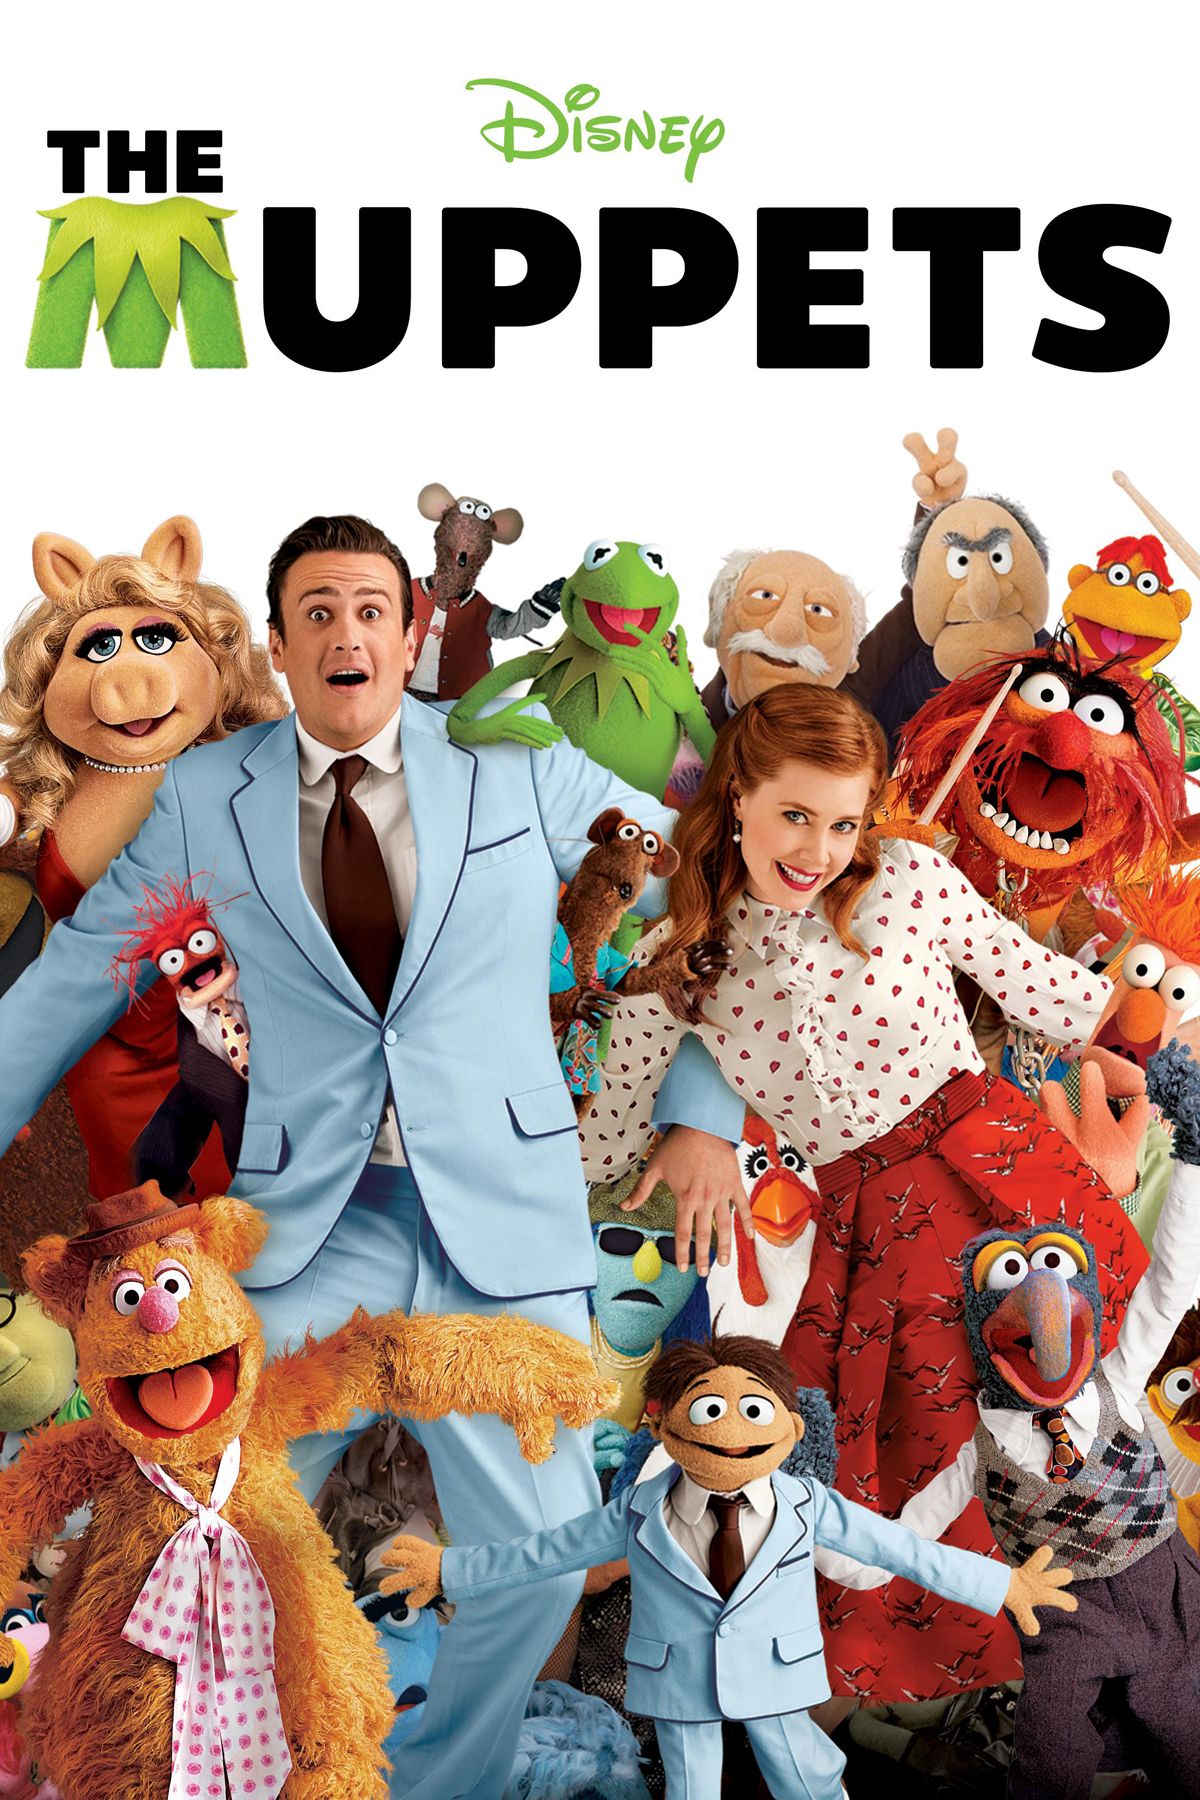 The Muppets Movie Poster